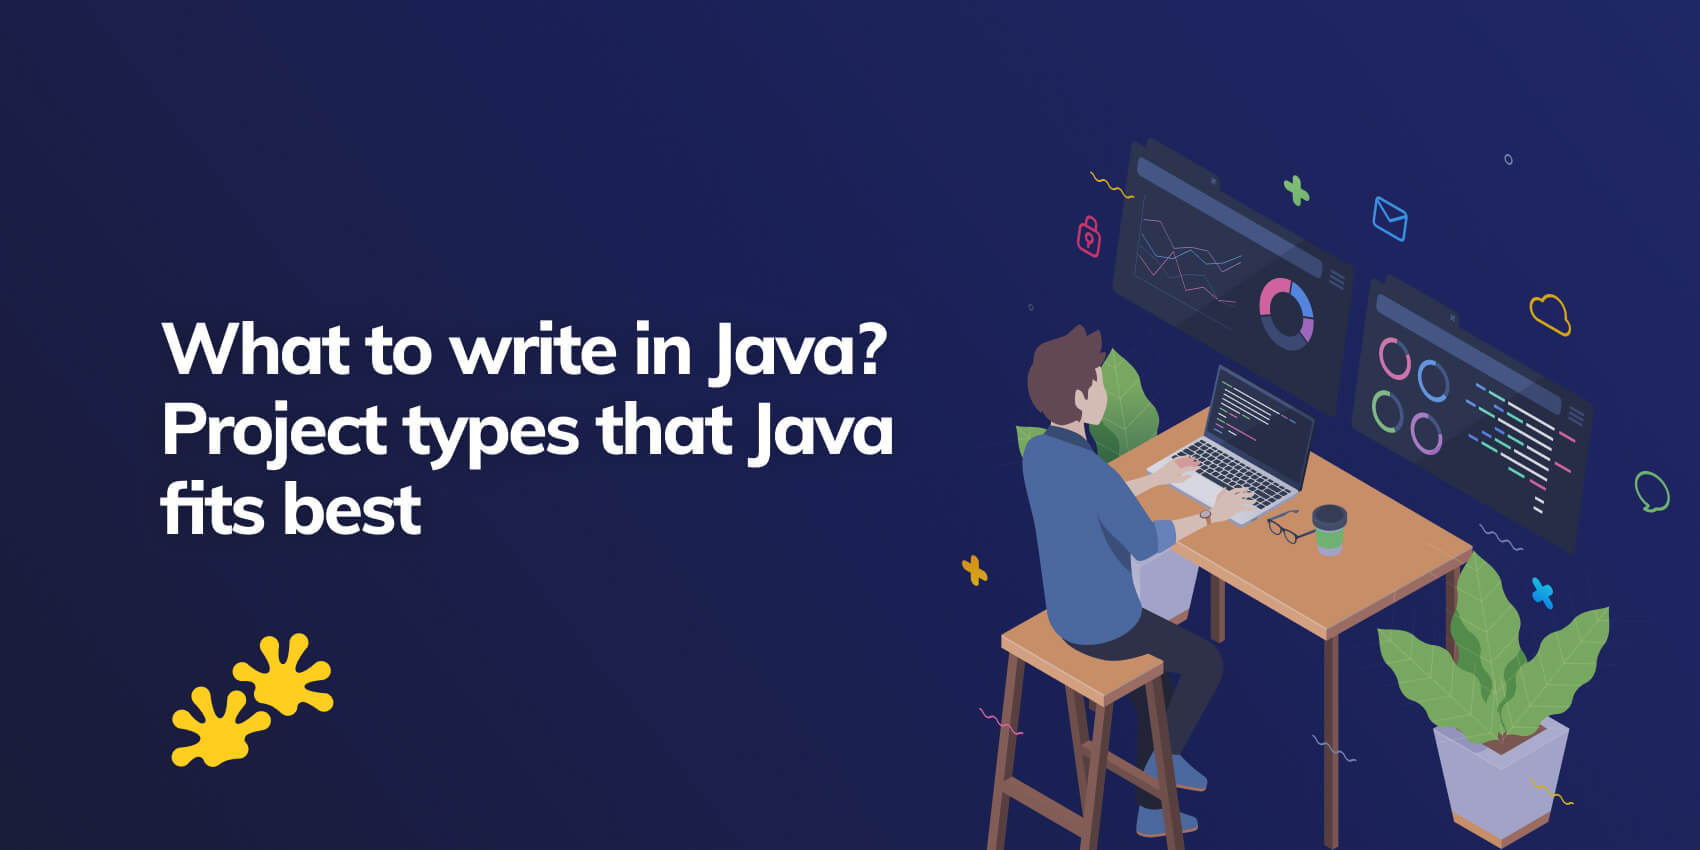 Project types that Java fits best